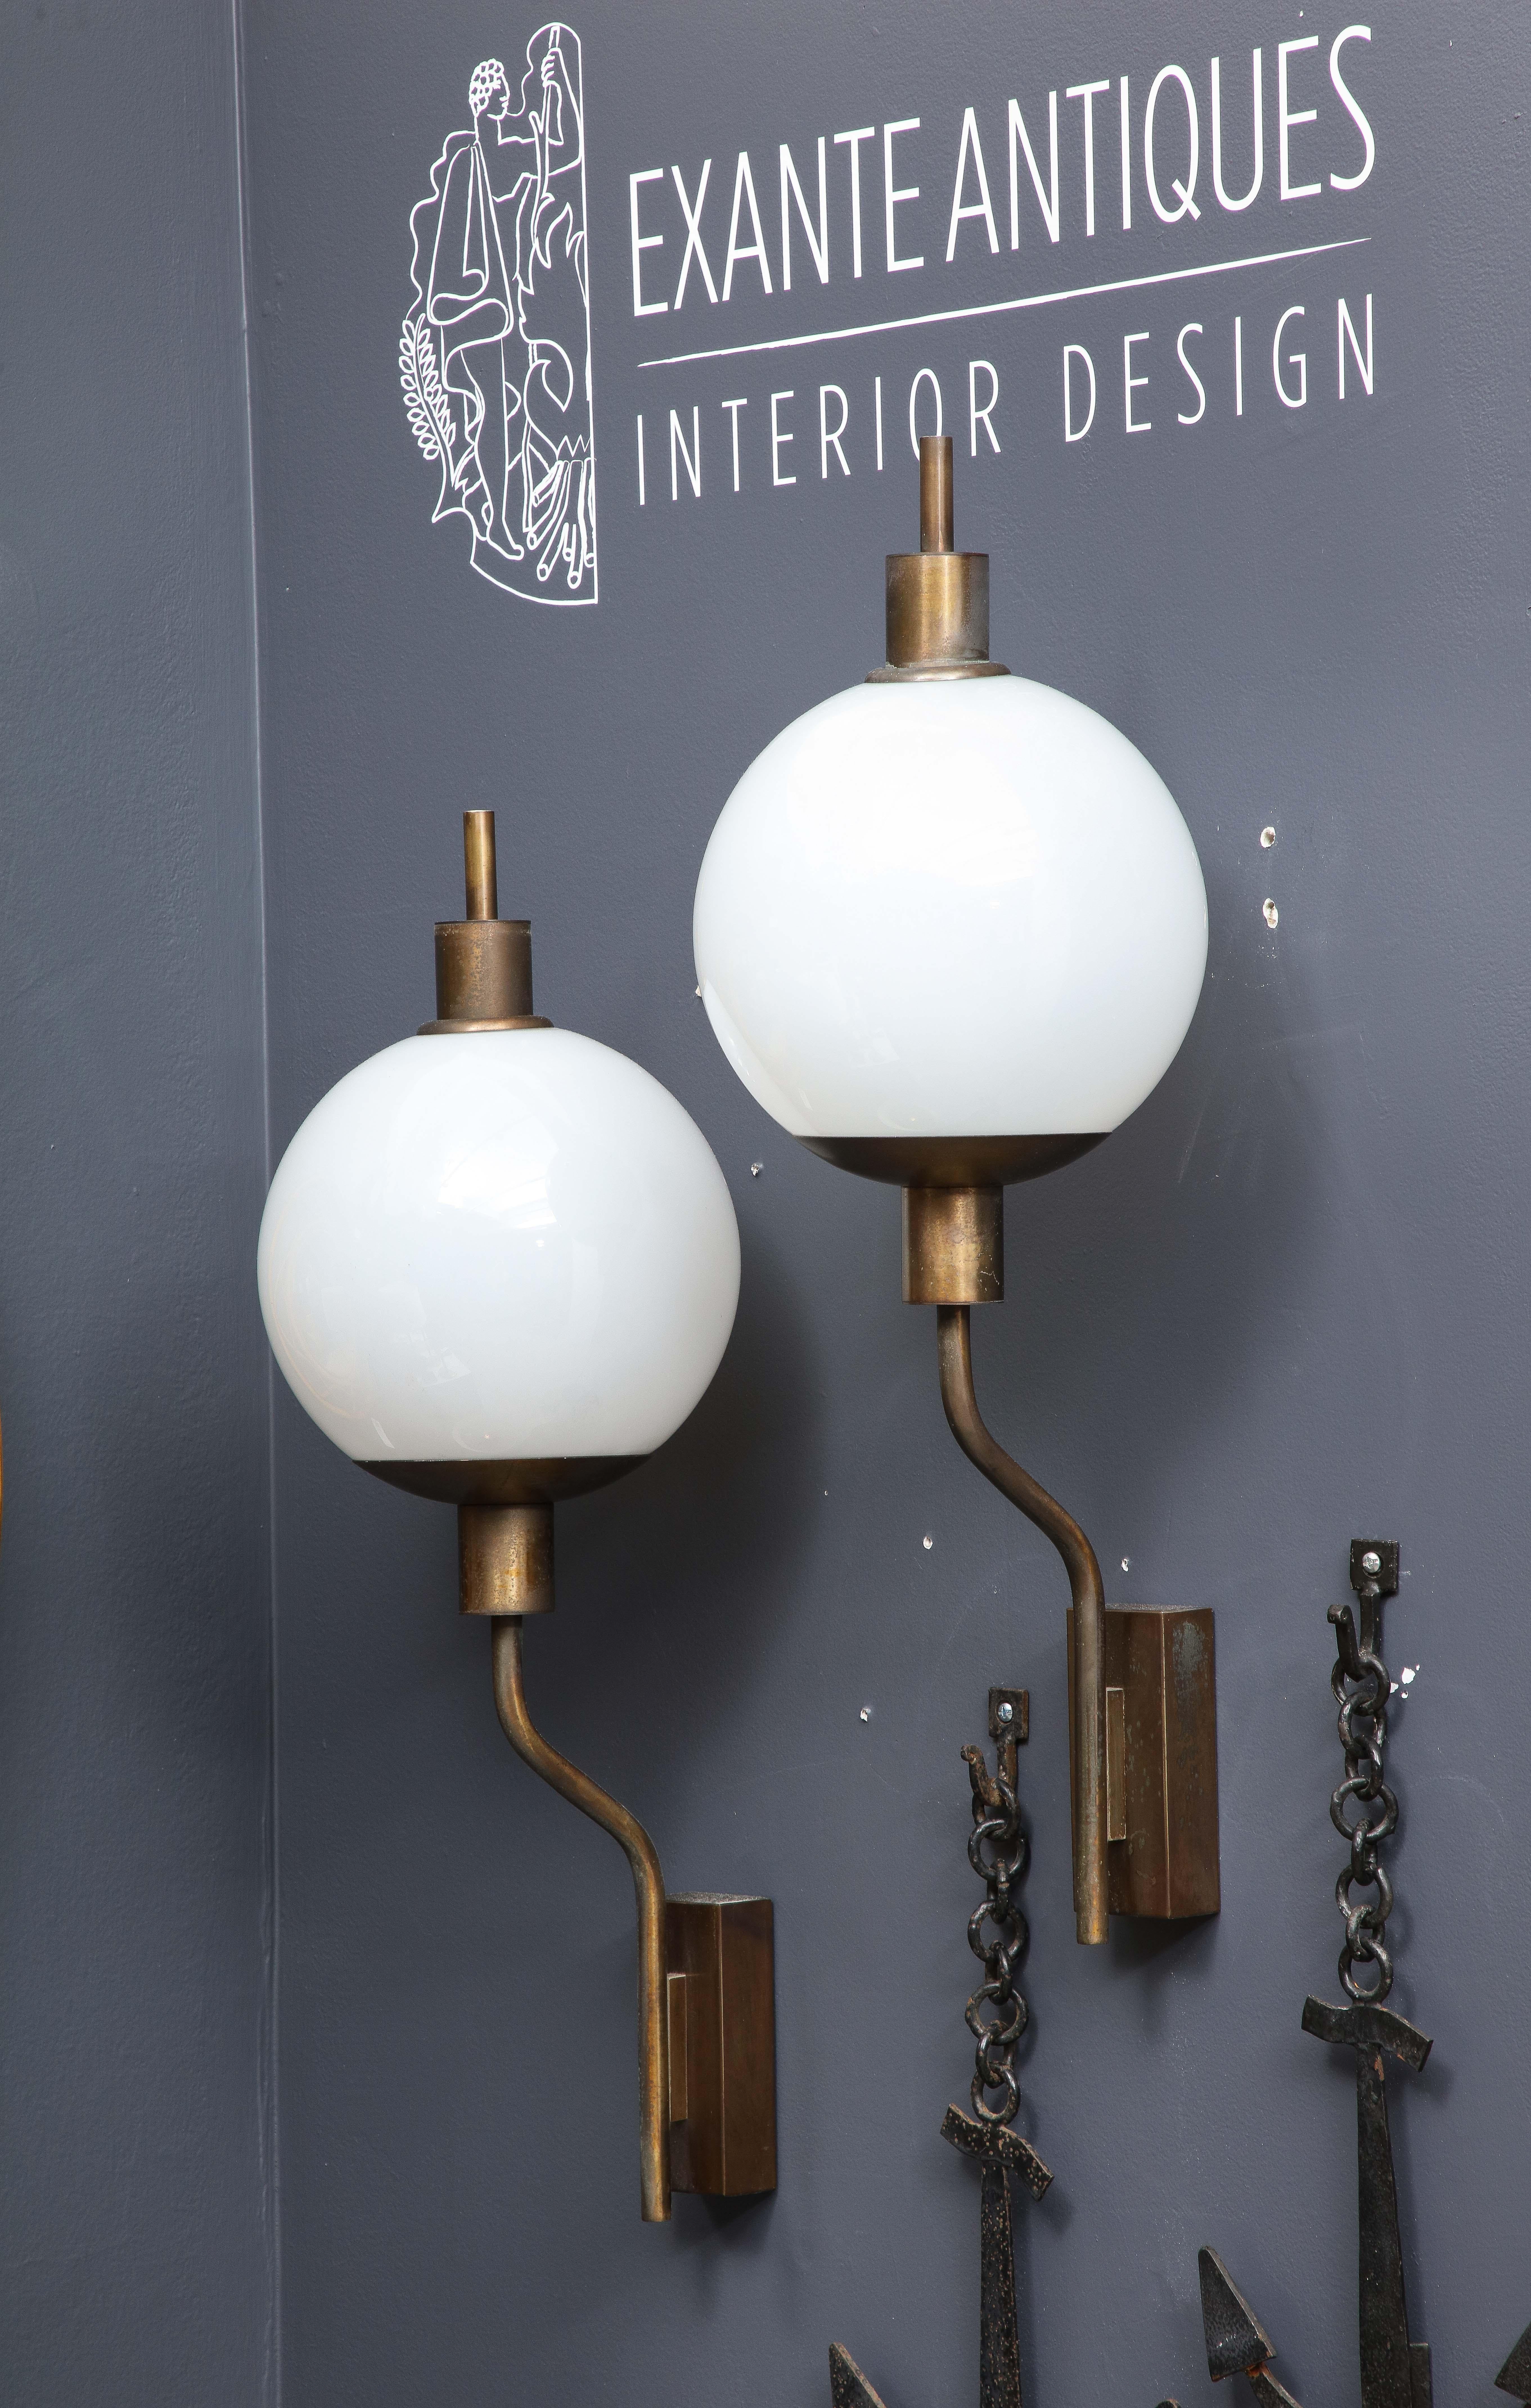 Rare pair of Italian Mid-Century Modern sconces. Attributed to Luigi Caccio Dominioni. 
Price includes rewiring for US.
These wall lights will ship from France and can be returned to either France or to a LIC NY location.
Price does not include